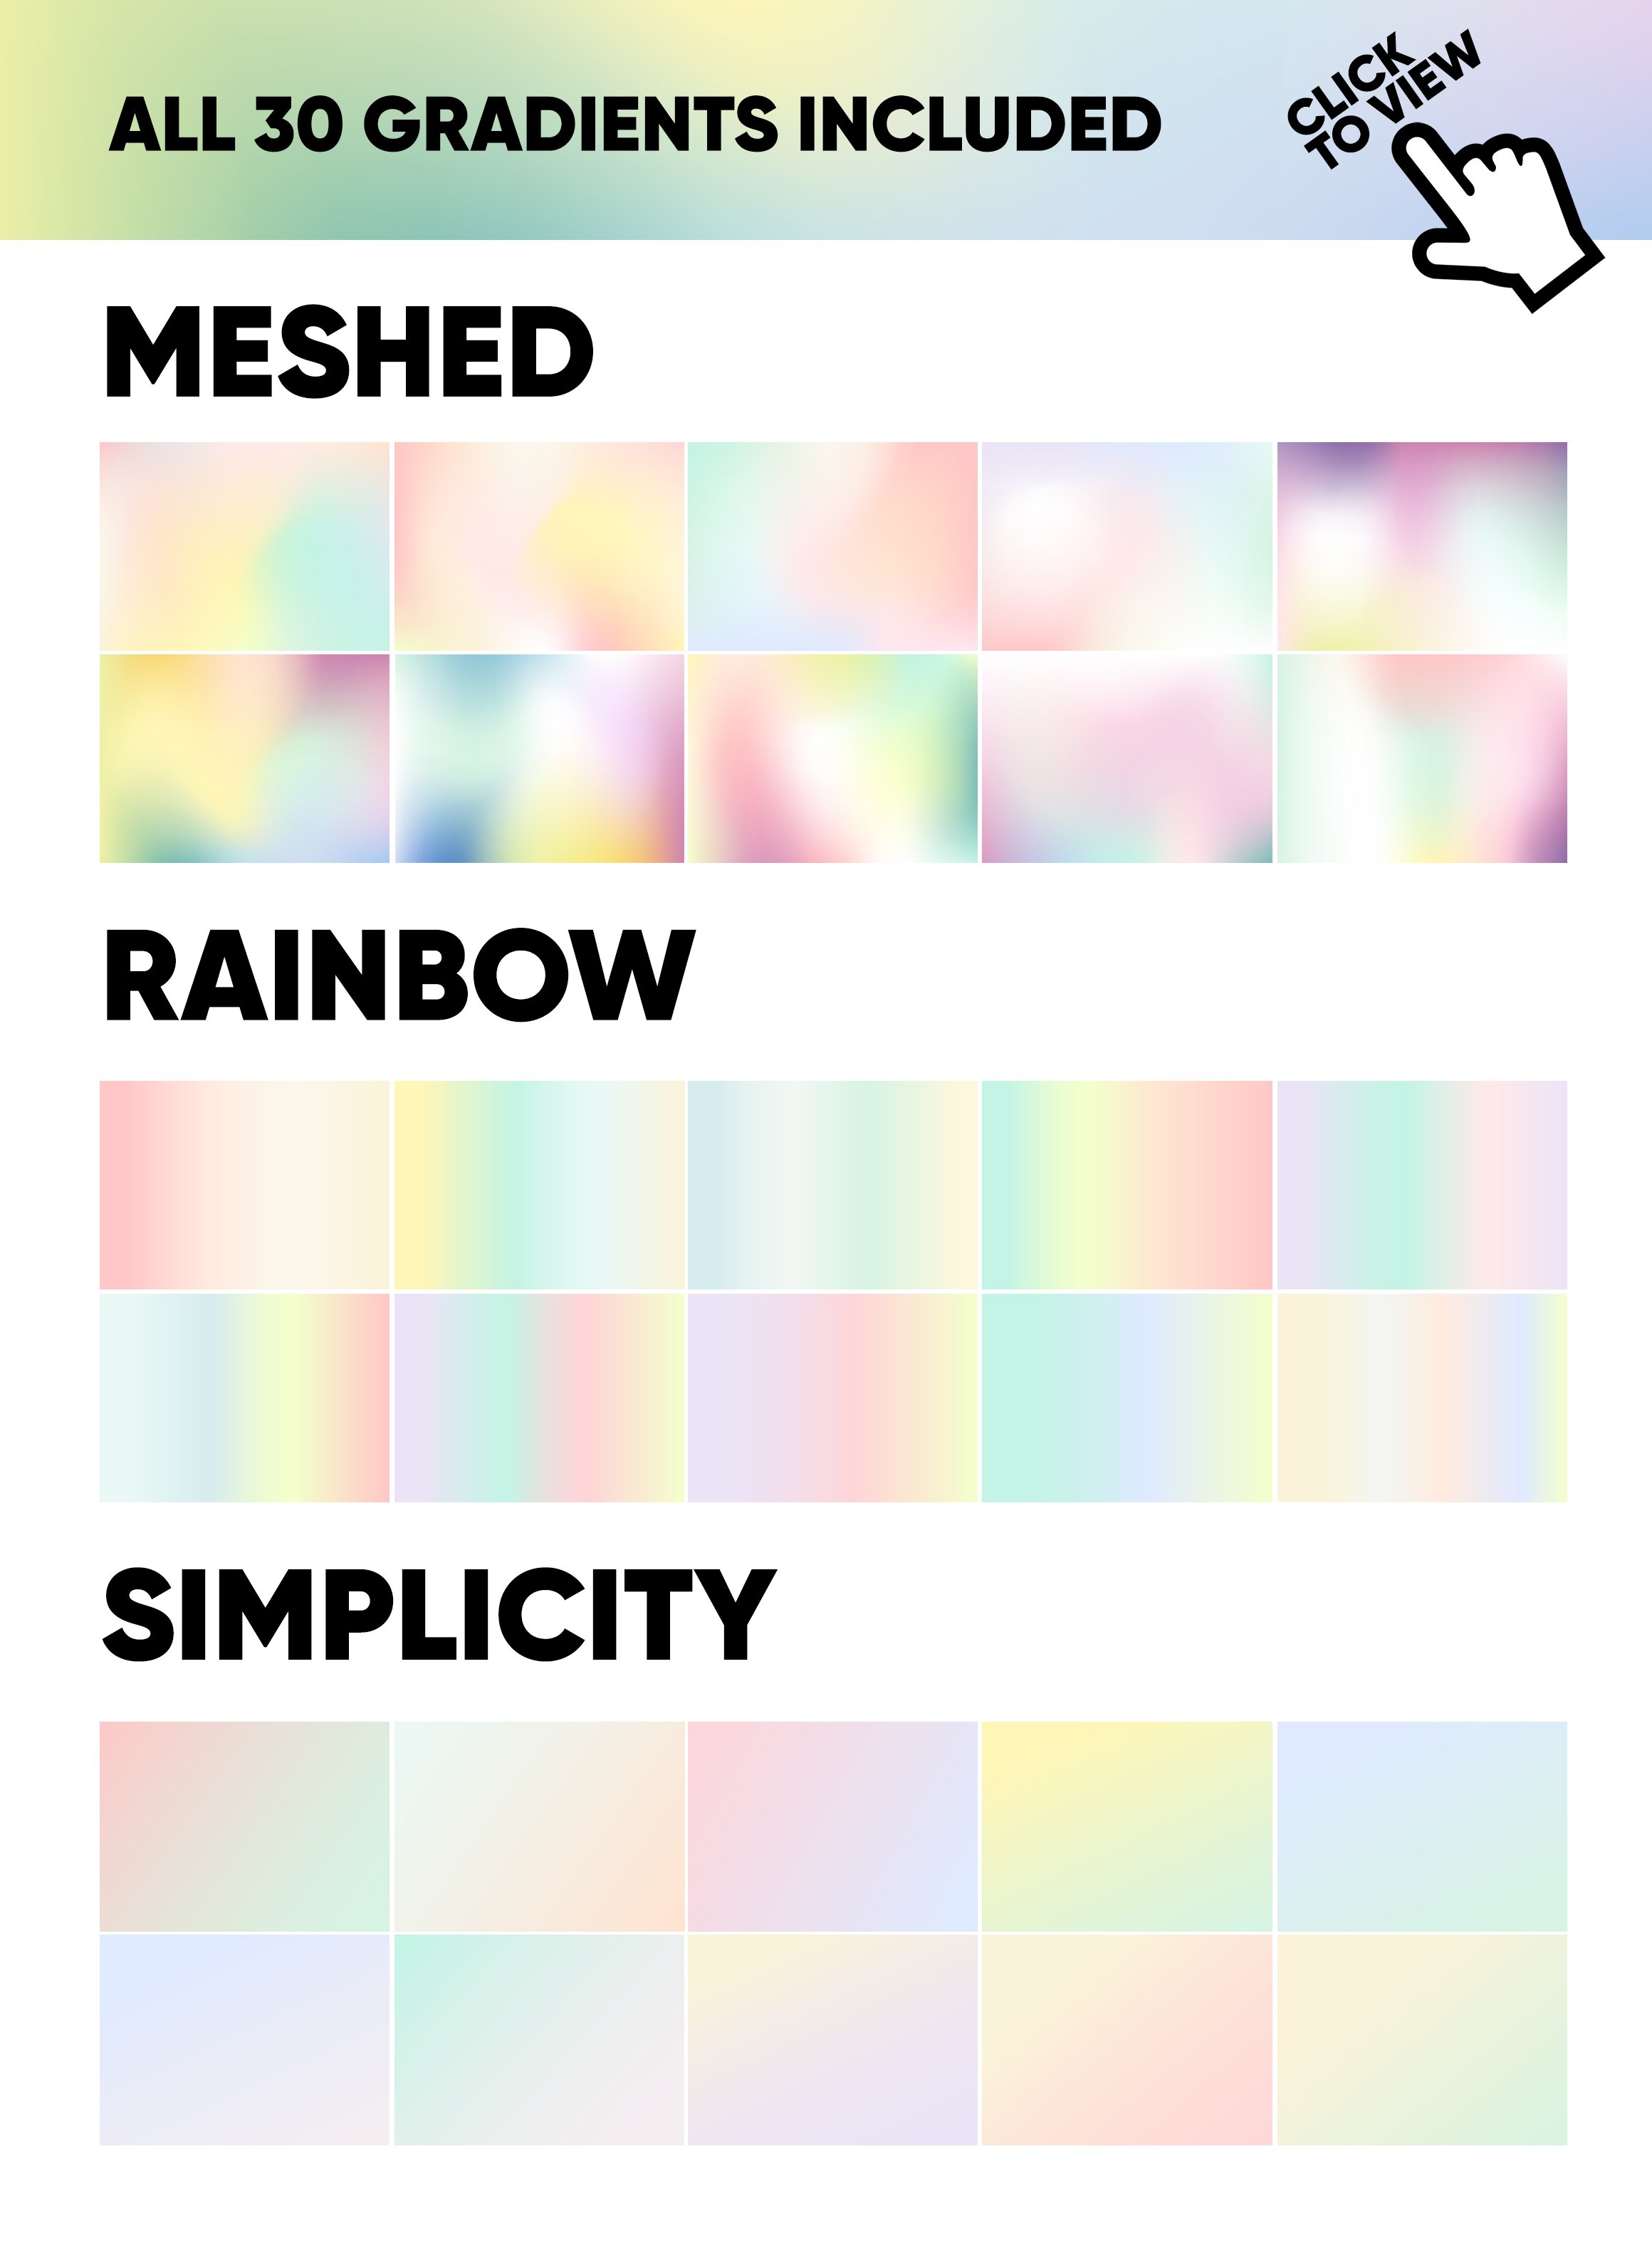 There is something so satisfying in a gradual gradient of pastel